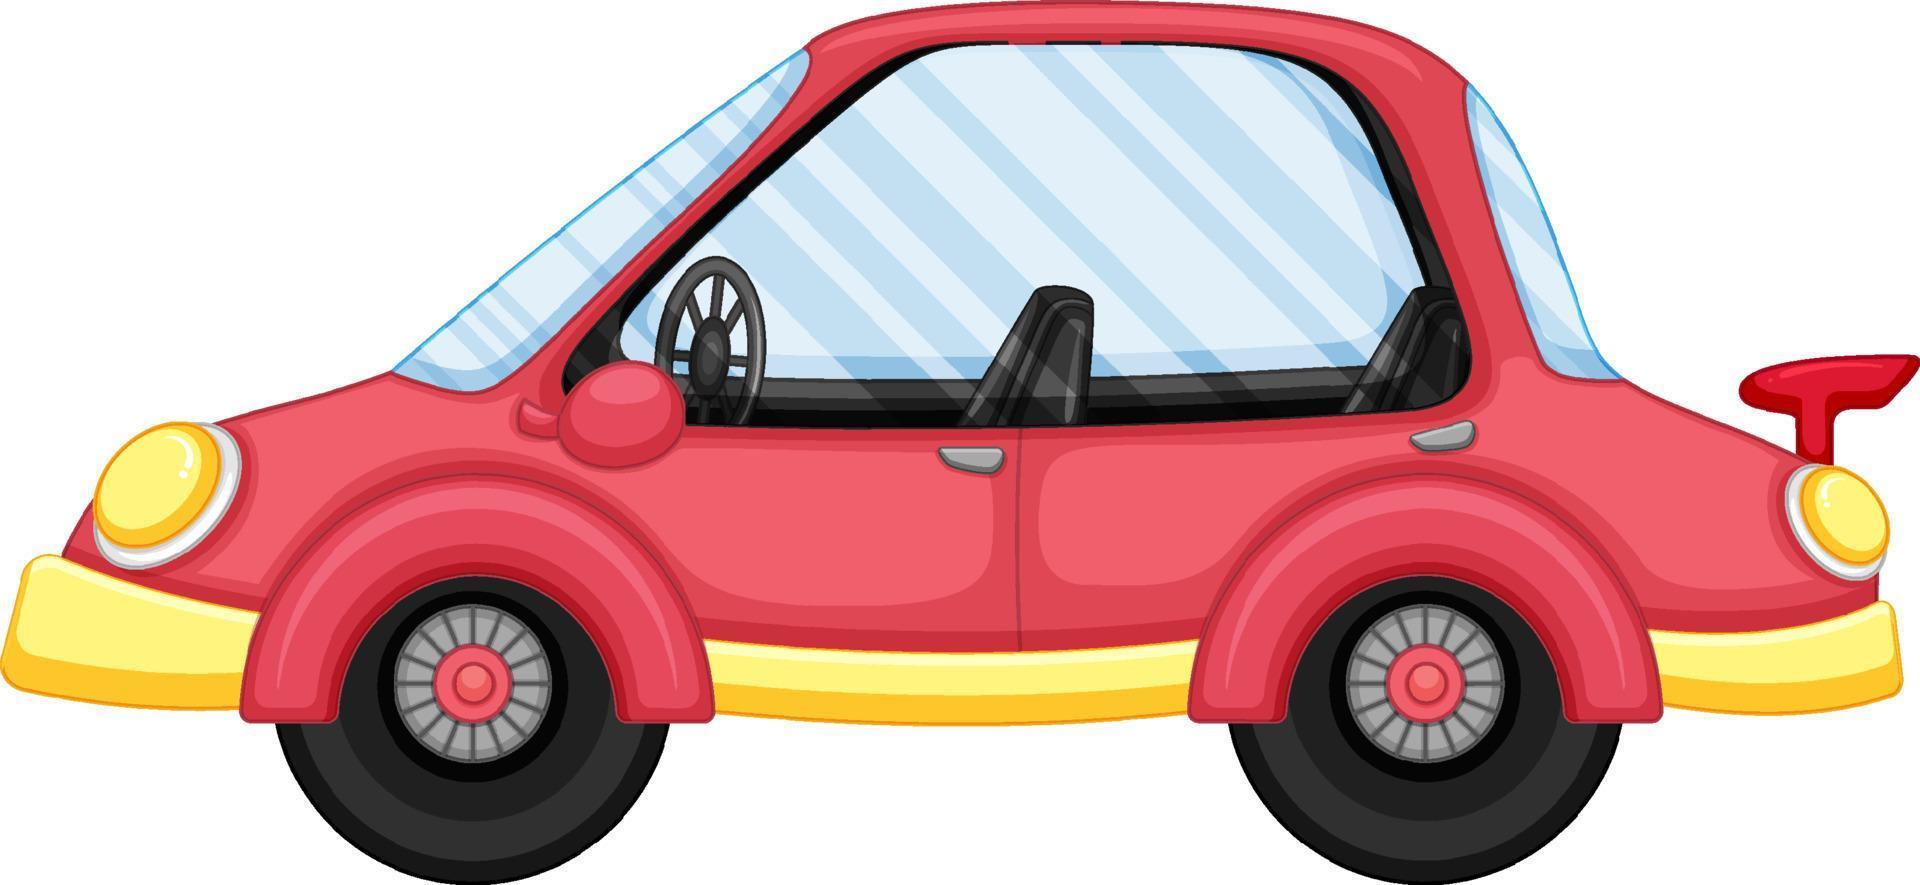 A red car in cartoon style vector